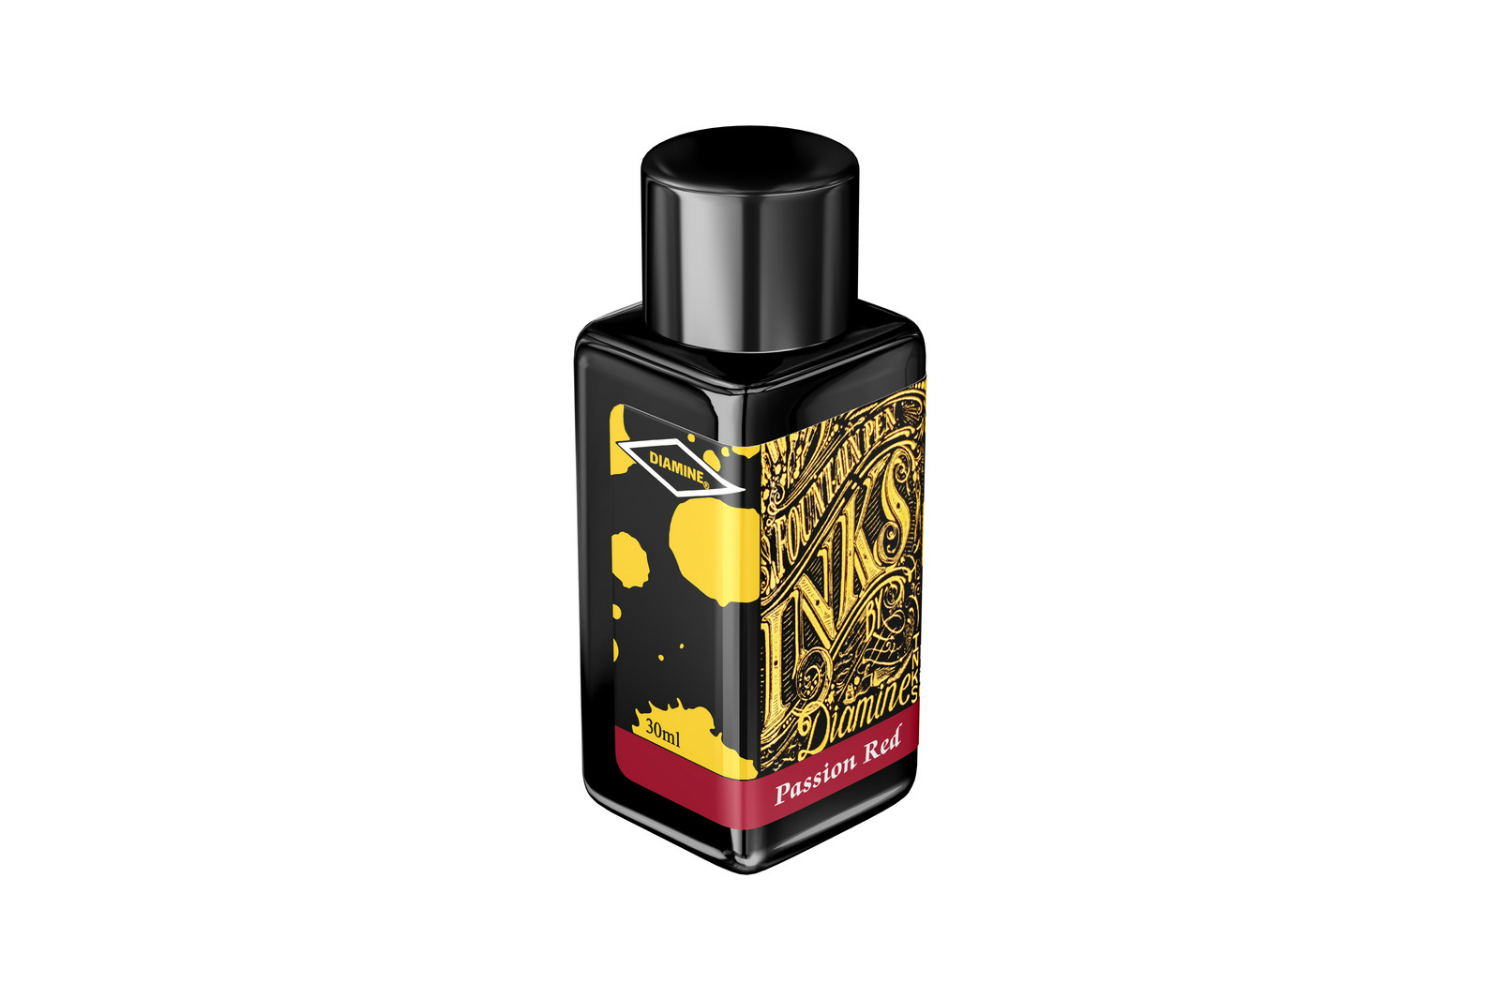 Diamine Passion Red - Bottled Ink 30 ml